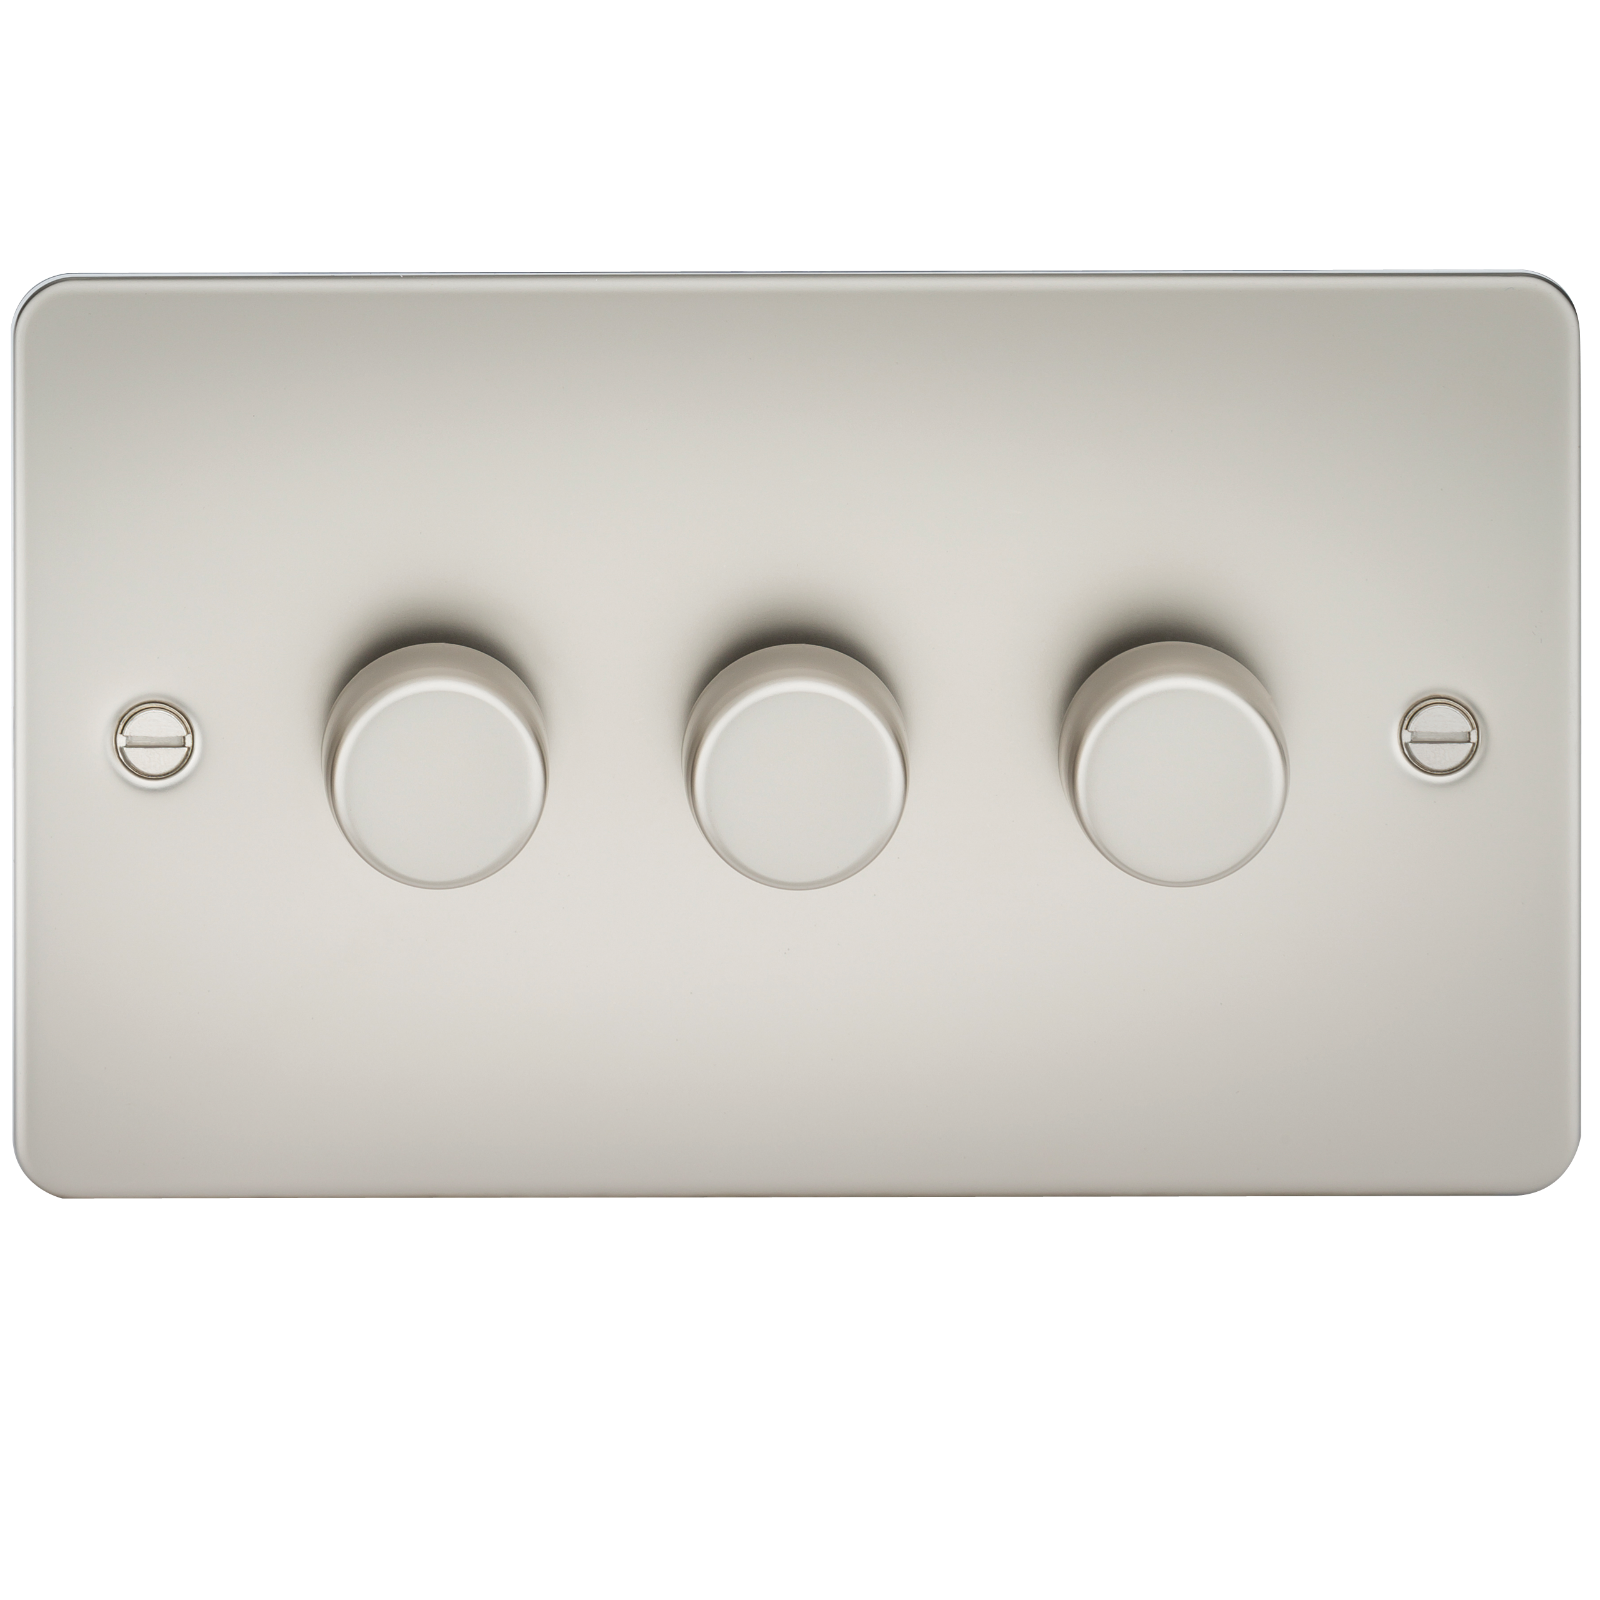 ML Accessories-FP2163PL Flat Plate 3G 2 Way Dimmer 60-400W - Pearl